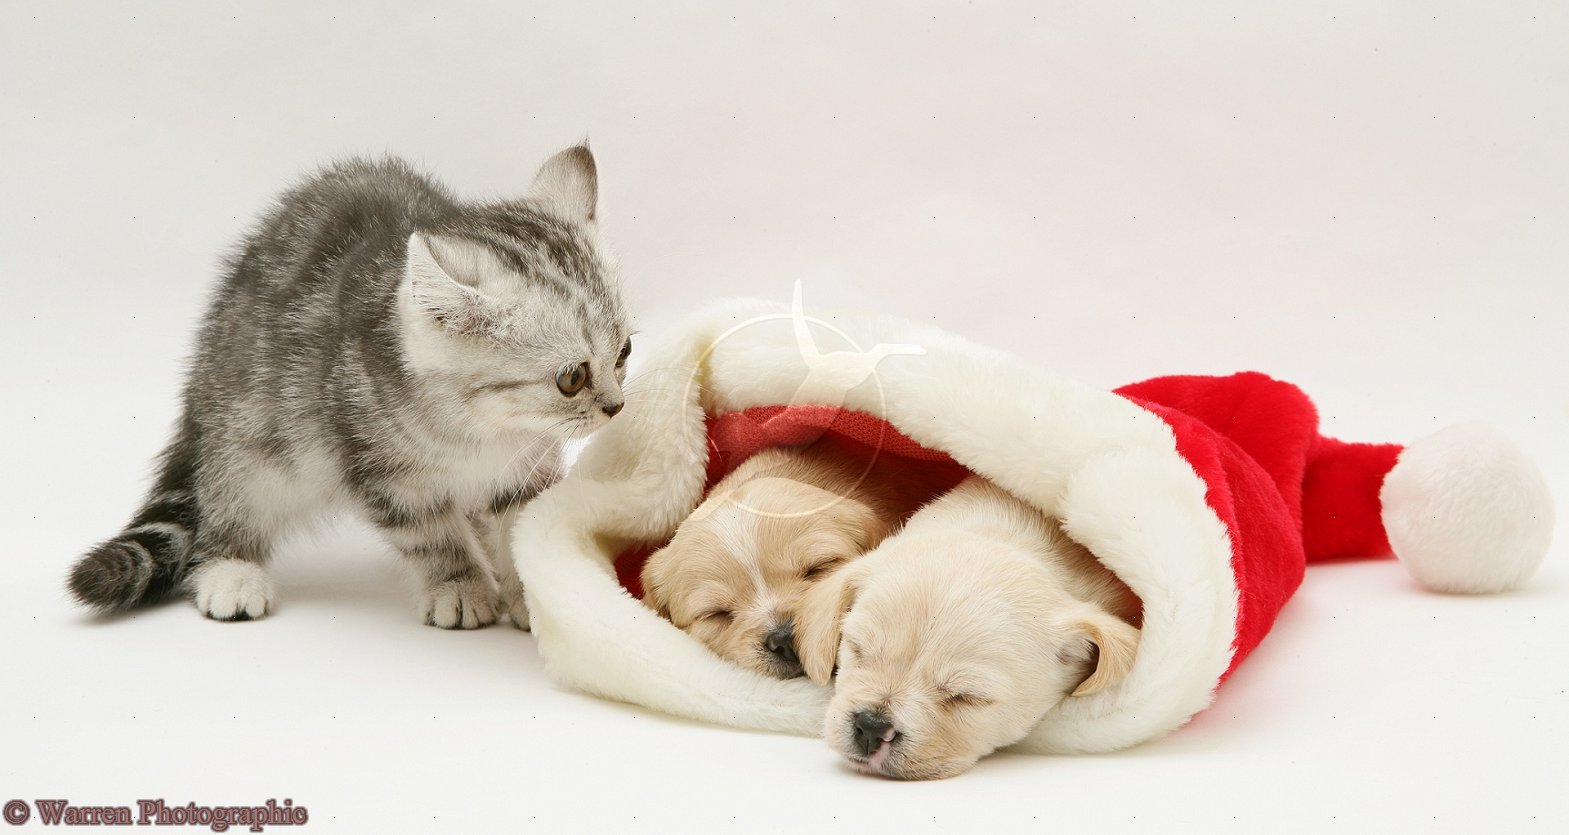 Cute Dogs and Cats Puppies Kittens   DopePicz